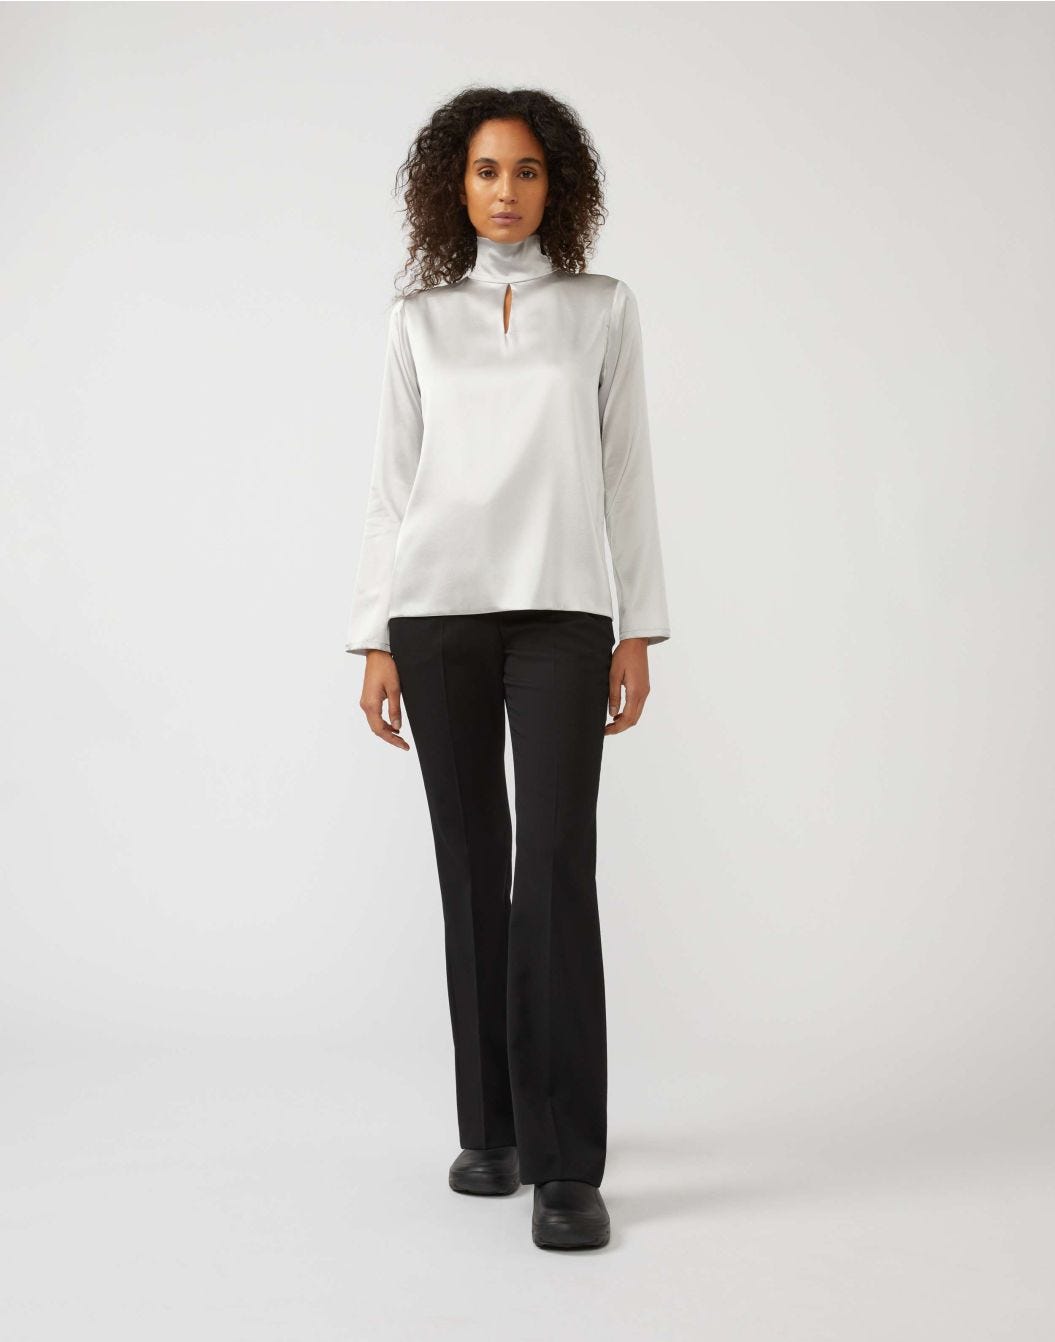 Grey high-neck top in stretch silk satin with a bow embellishment